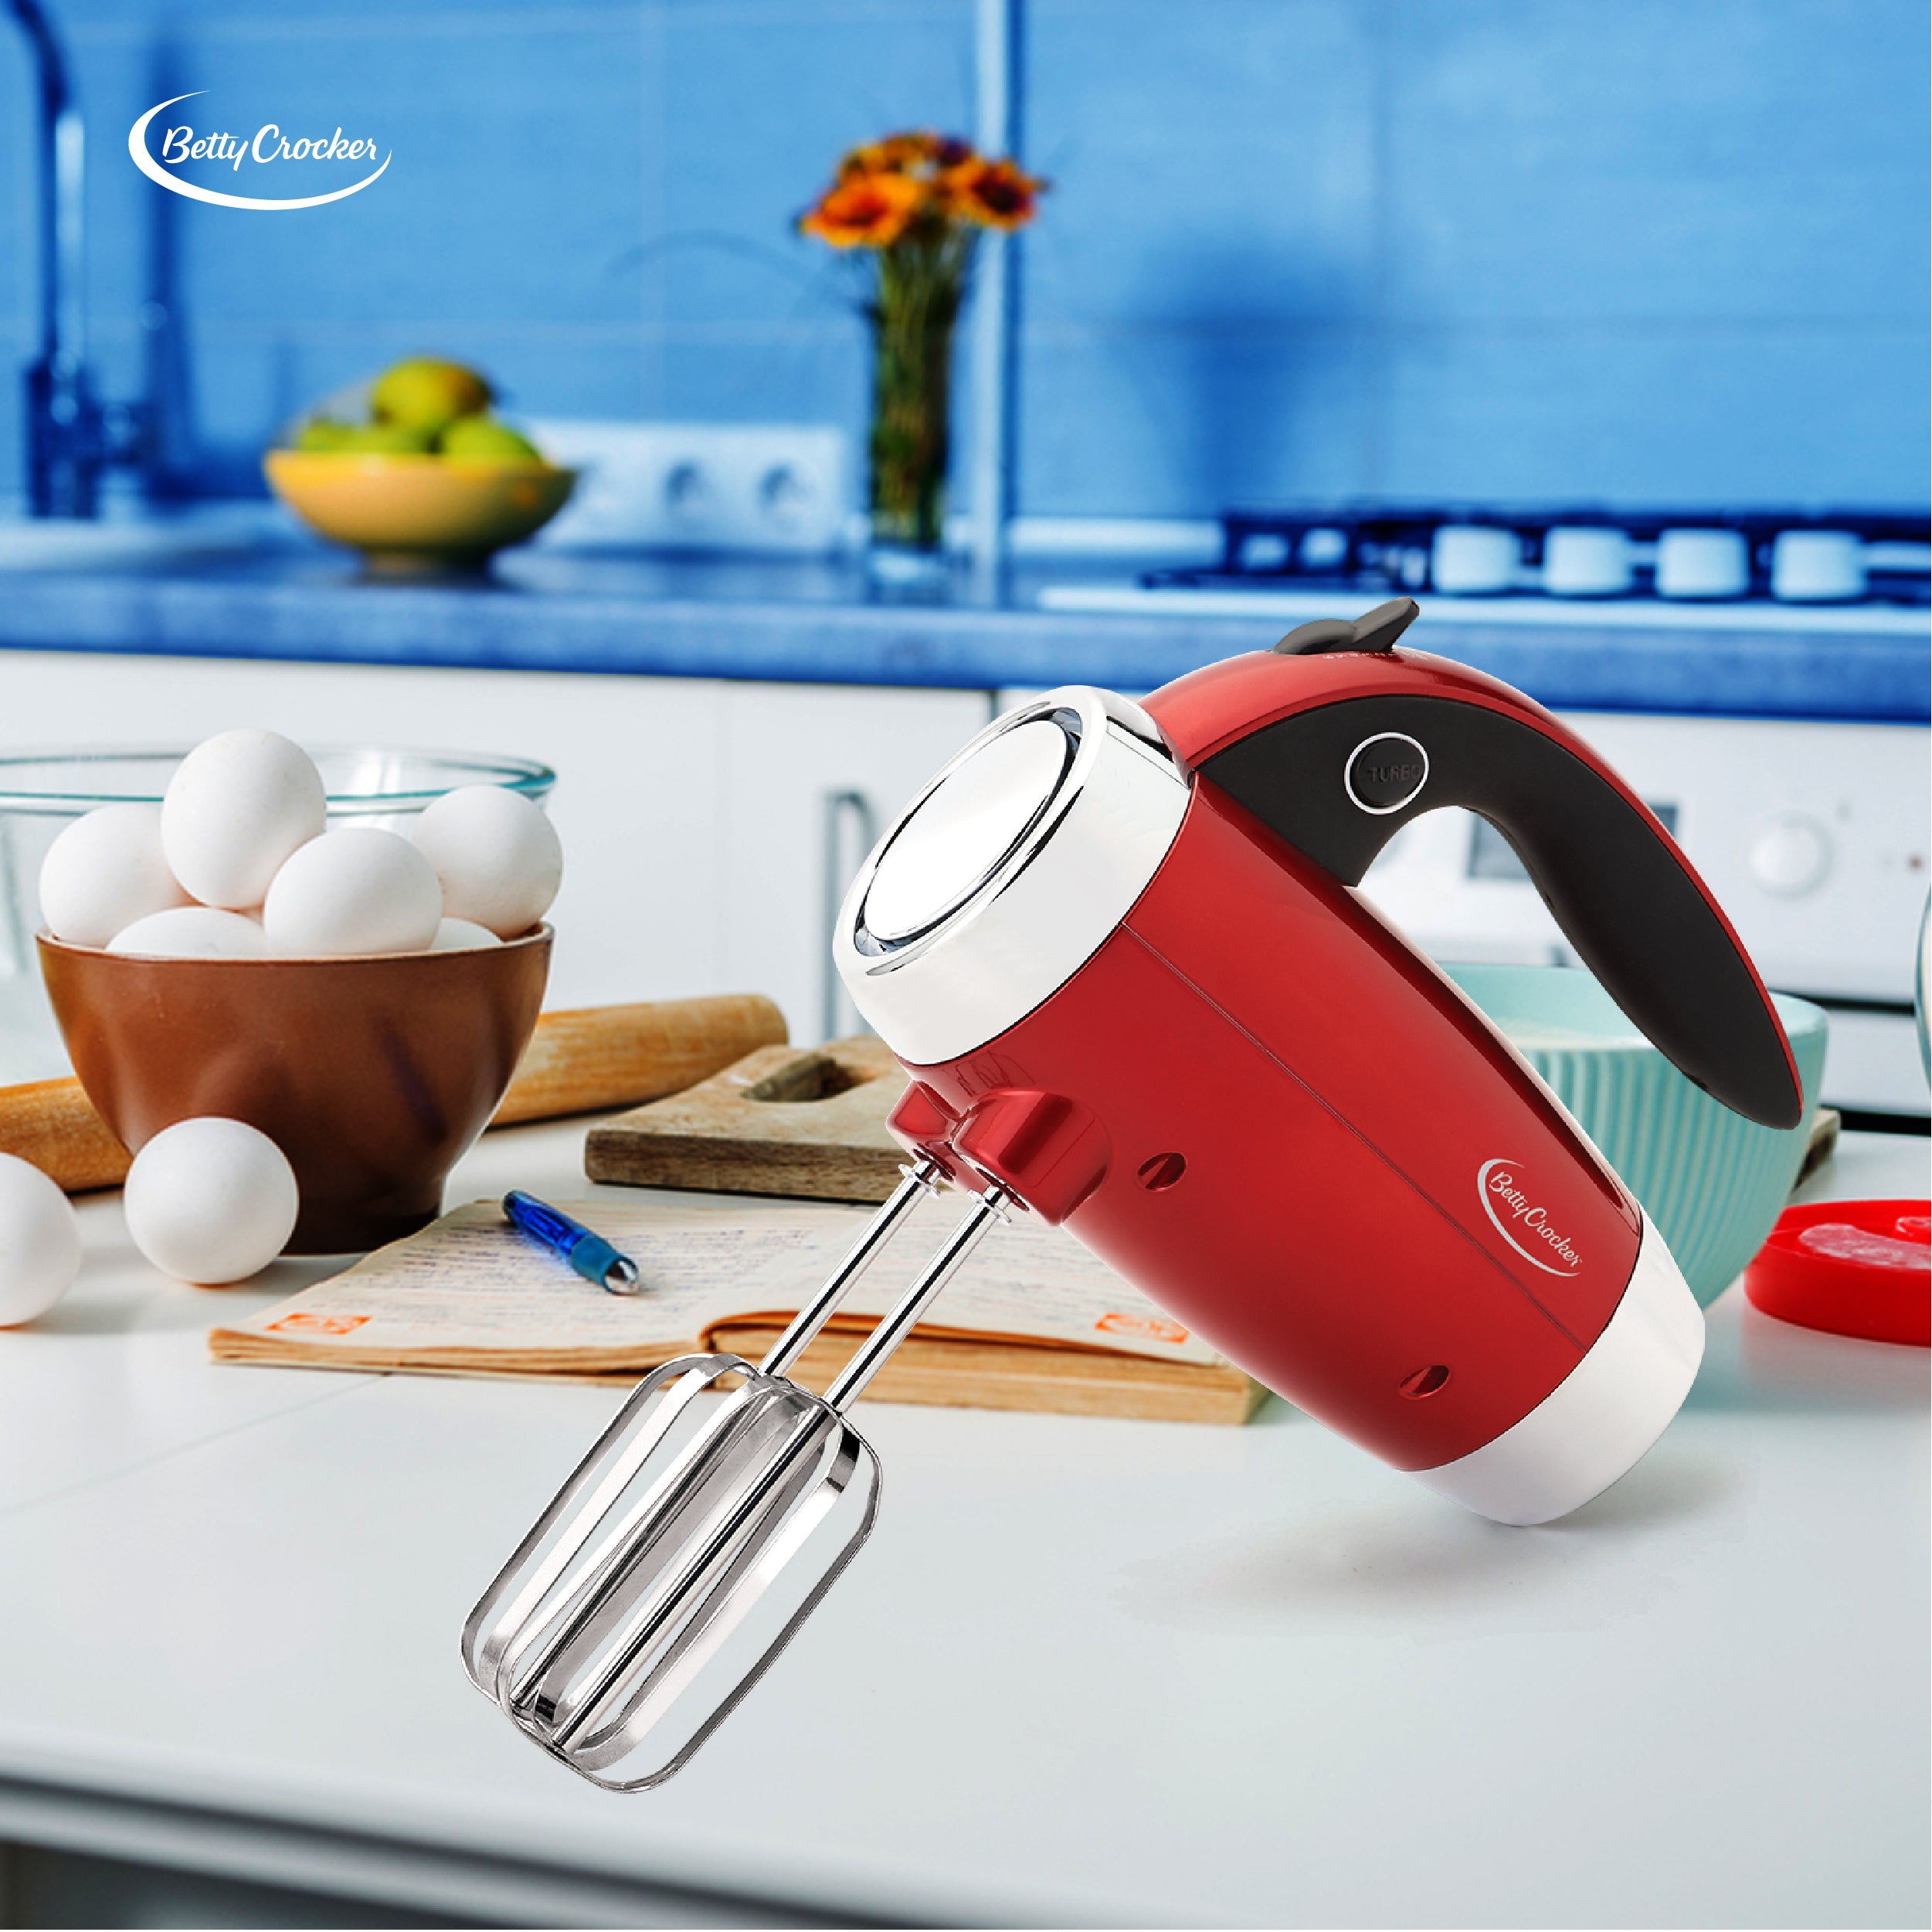 Betty Crocker 7 Speed Hand Mixer with Stand with Chrome Beater and Hooks, Metallic Red